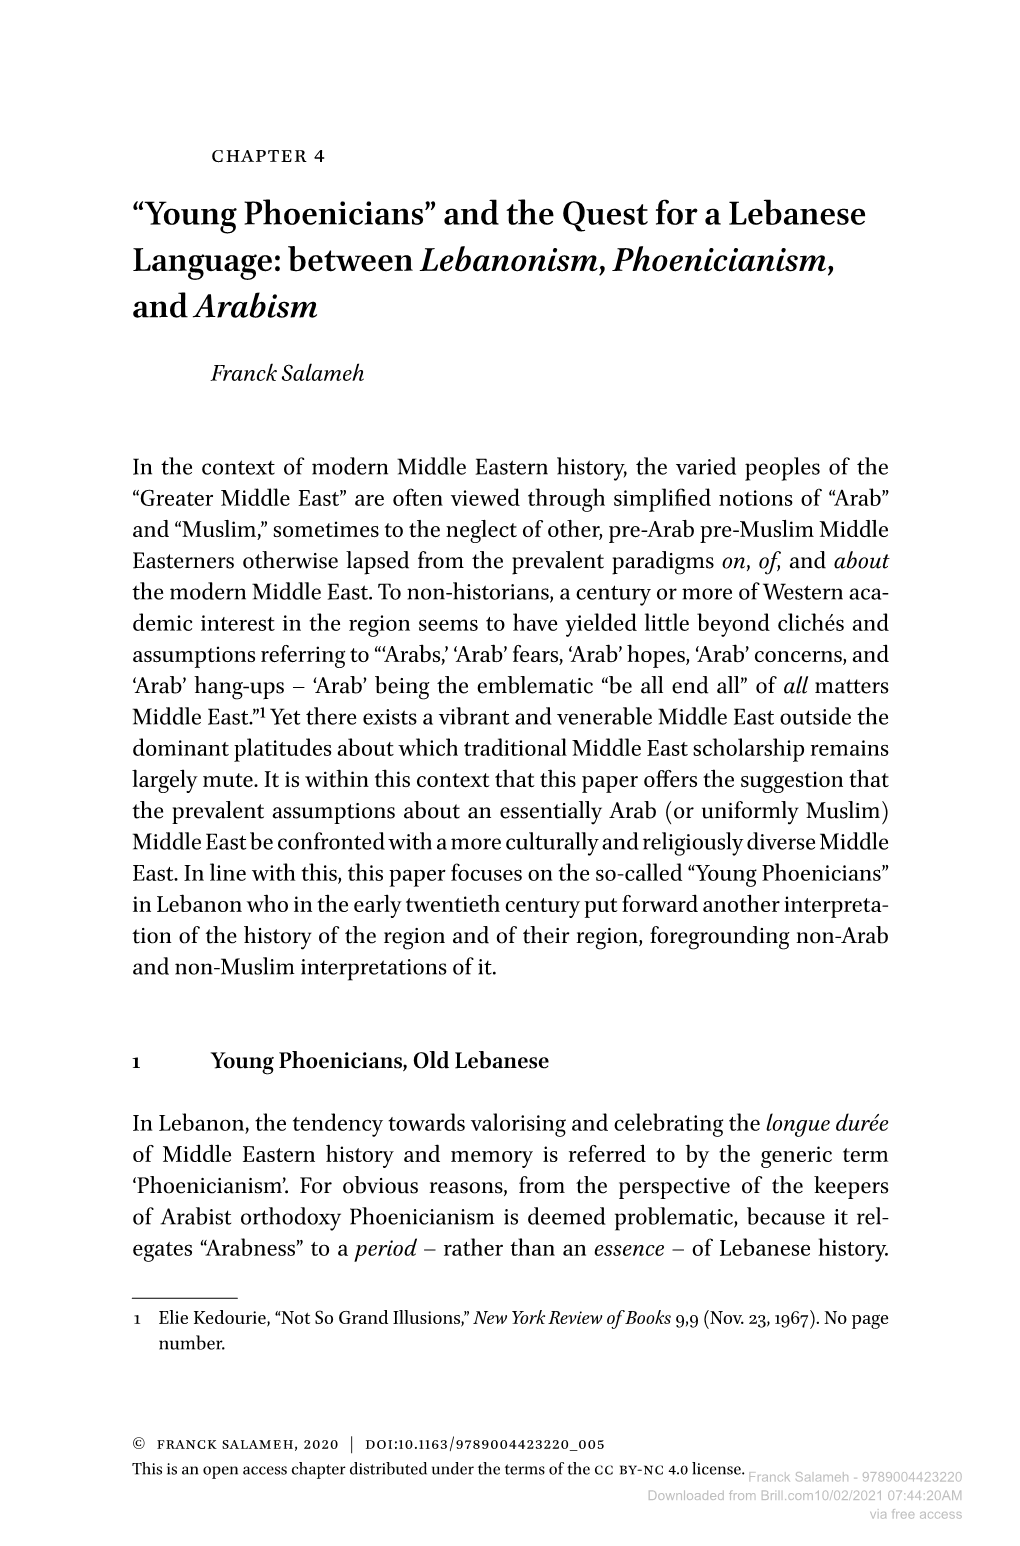 Young Phoenicians” and the Quest for a Lebanese Language: Between Lebanonism, Phoenicianism, and Arabism